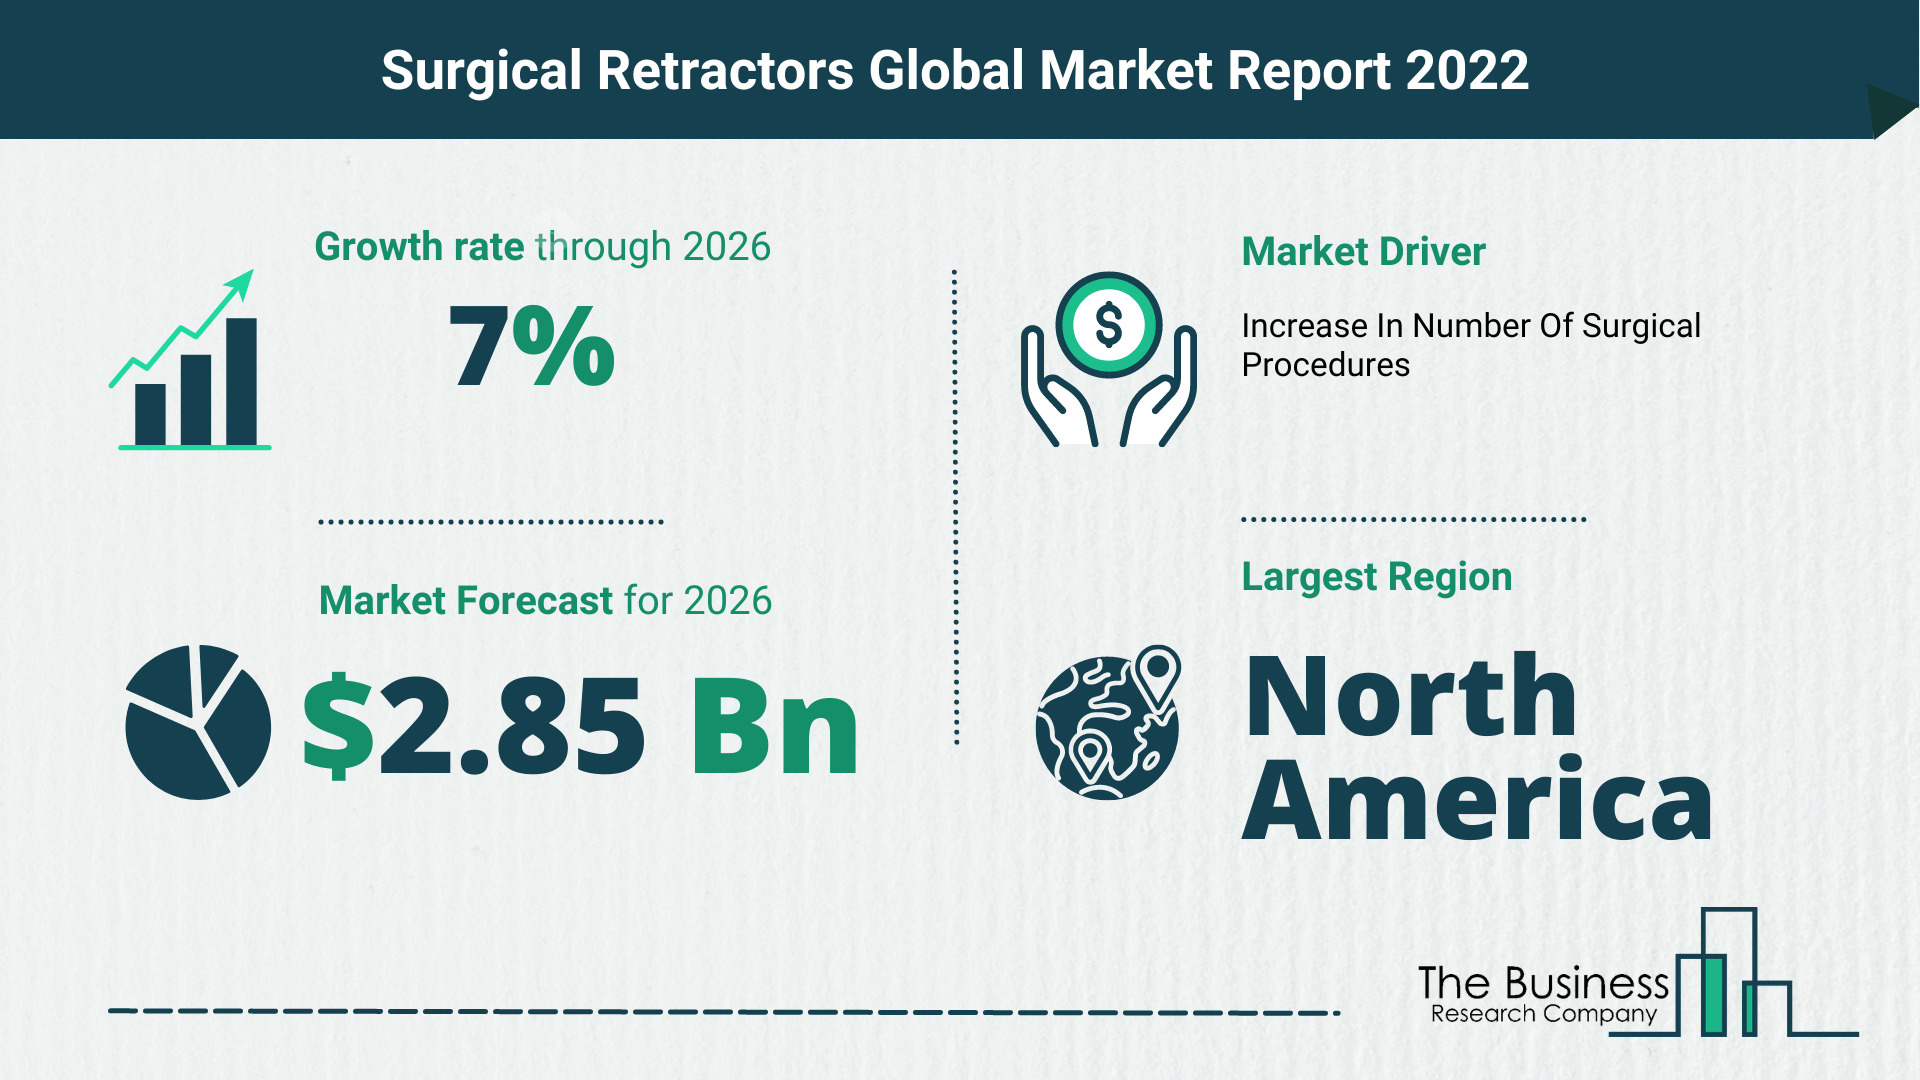 The Surgical Retractors Market Share, Market Size, And Growth Rate 2022